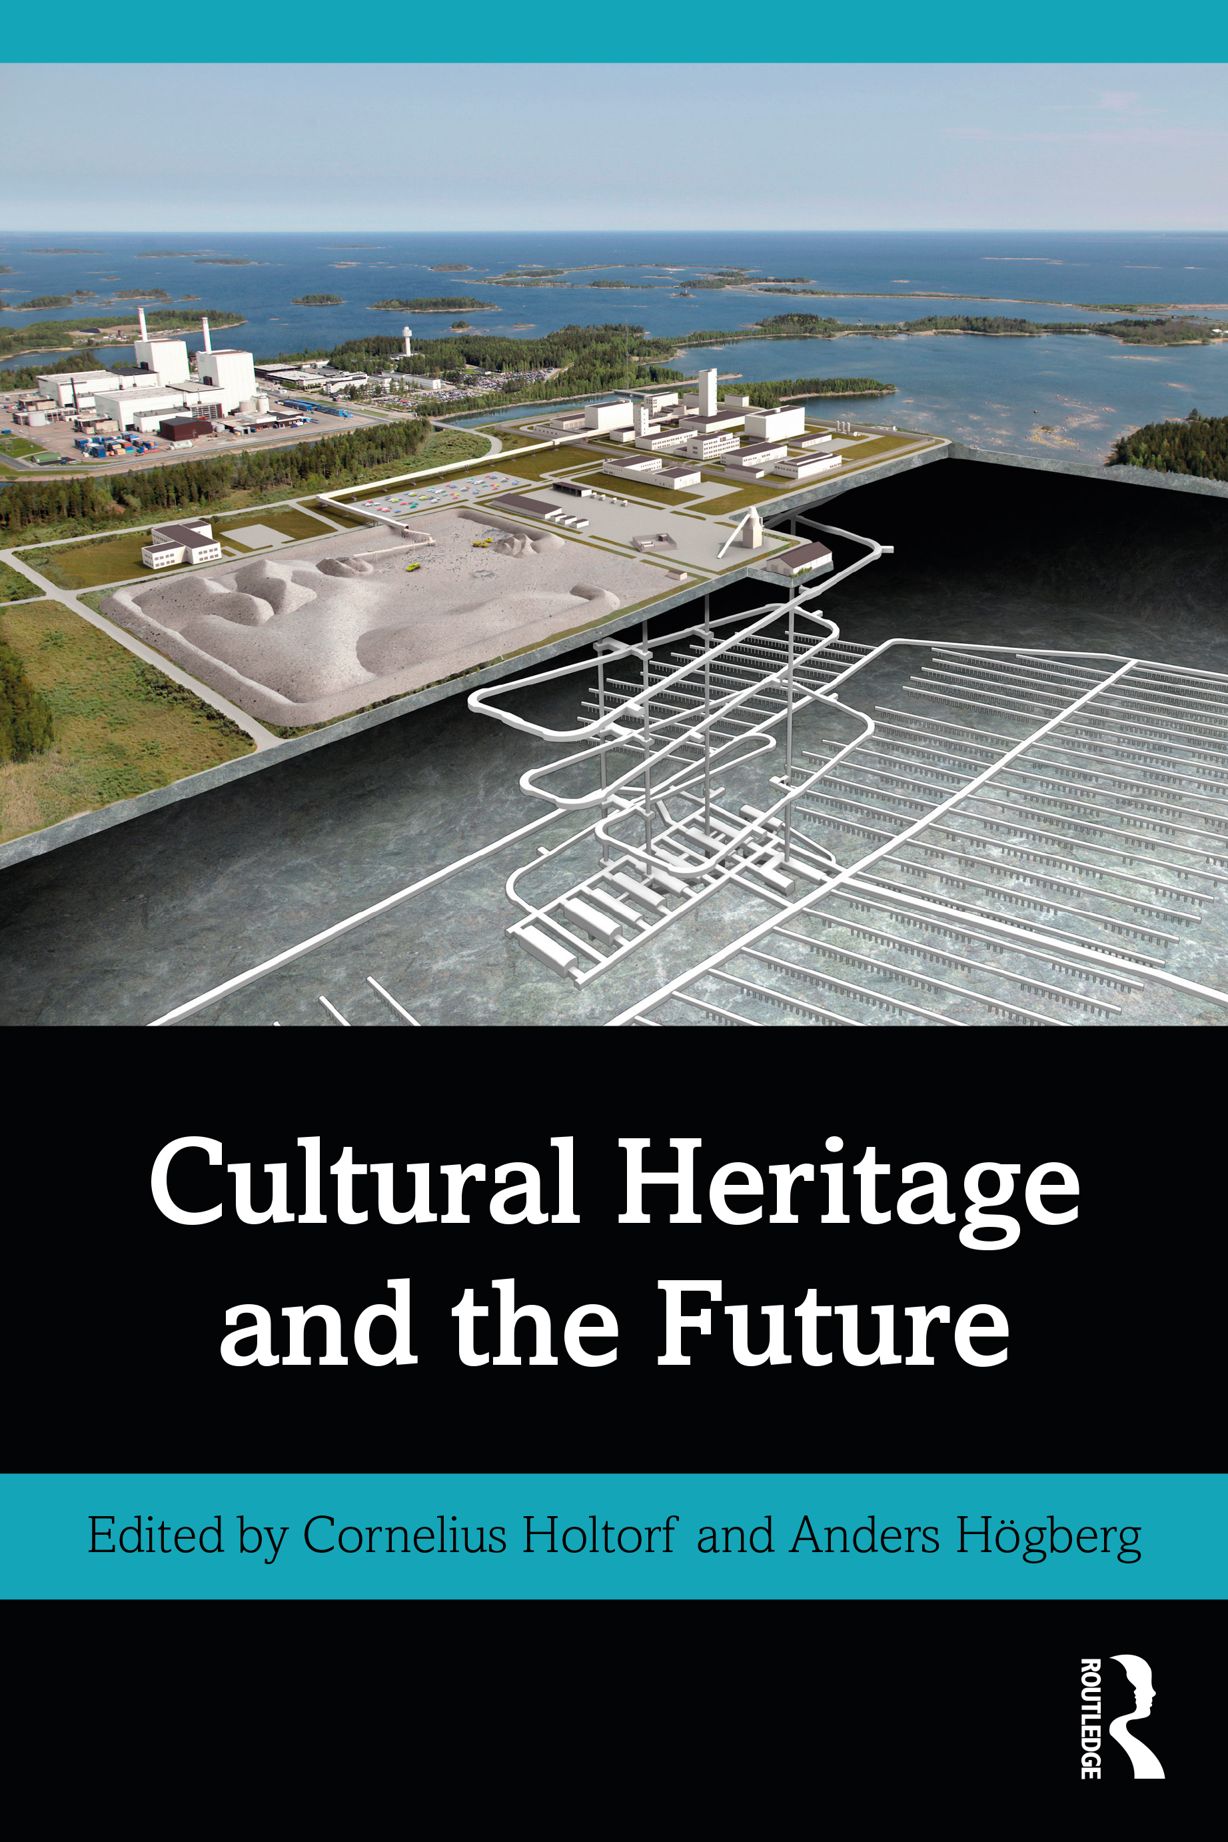 Cultural Heritage and the Future. Book cover, courtesy of Routledge.